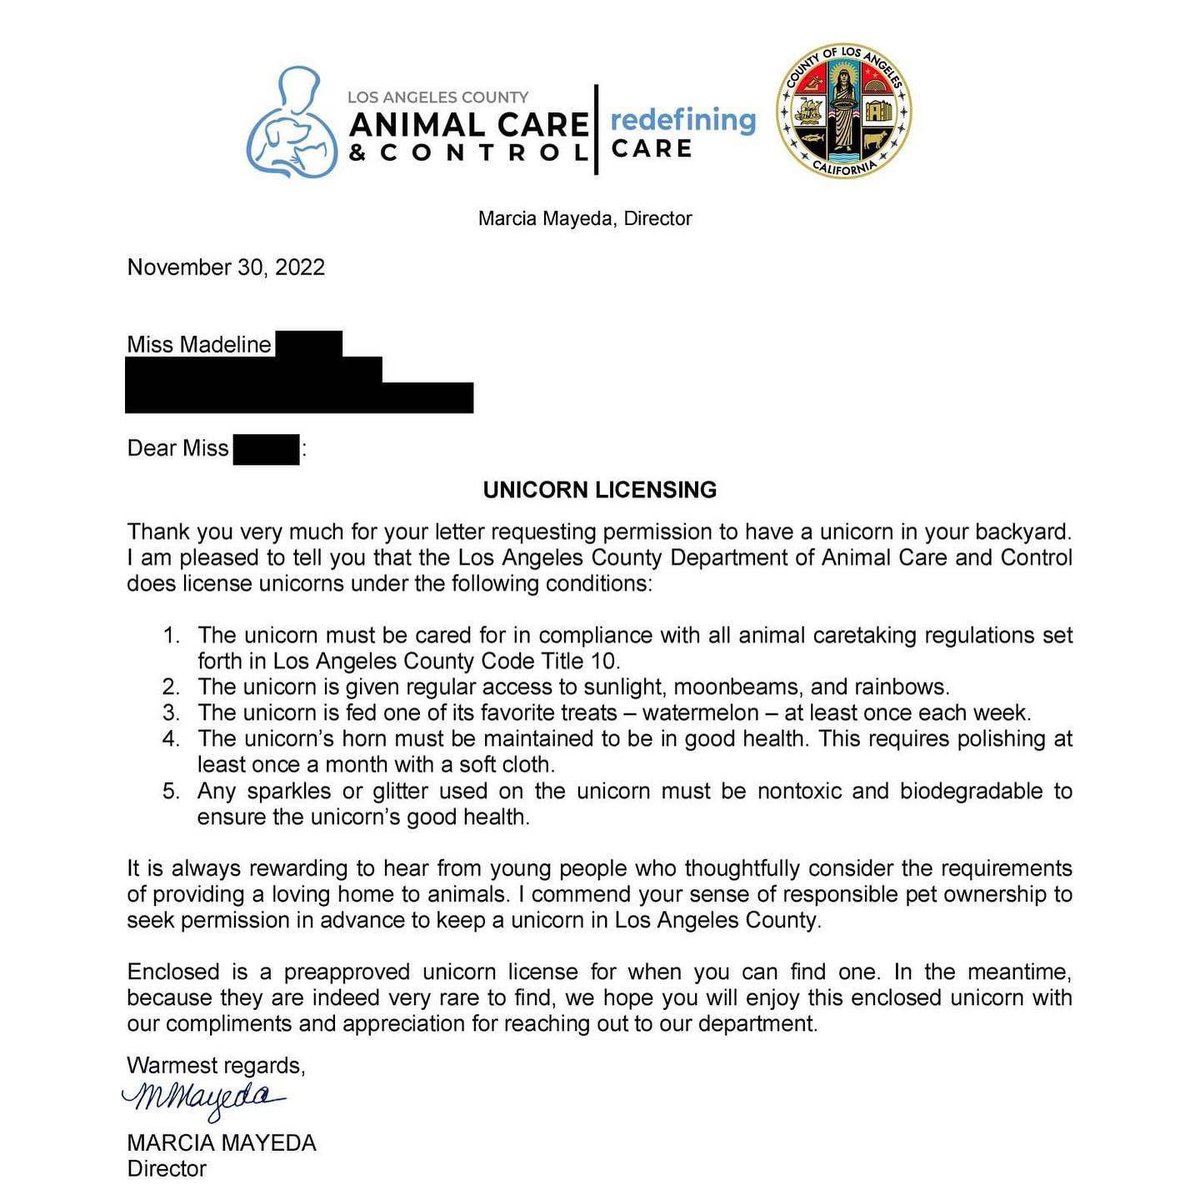 A 10 year old girl in LA wanted a unicorn license. She wrote Animal Care, and they replied brilliantly. 🥰🥰